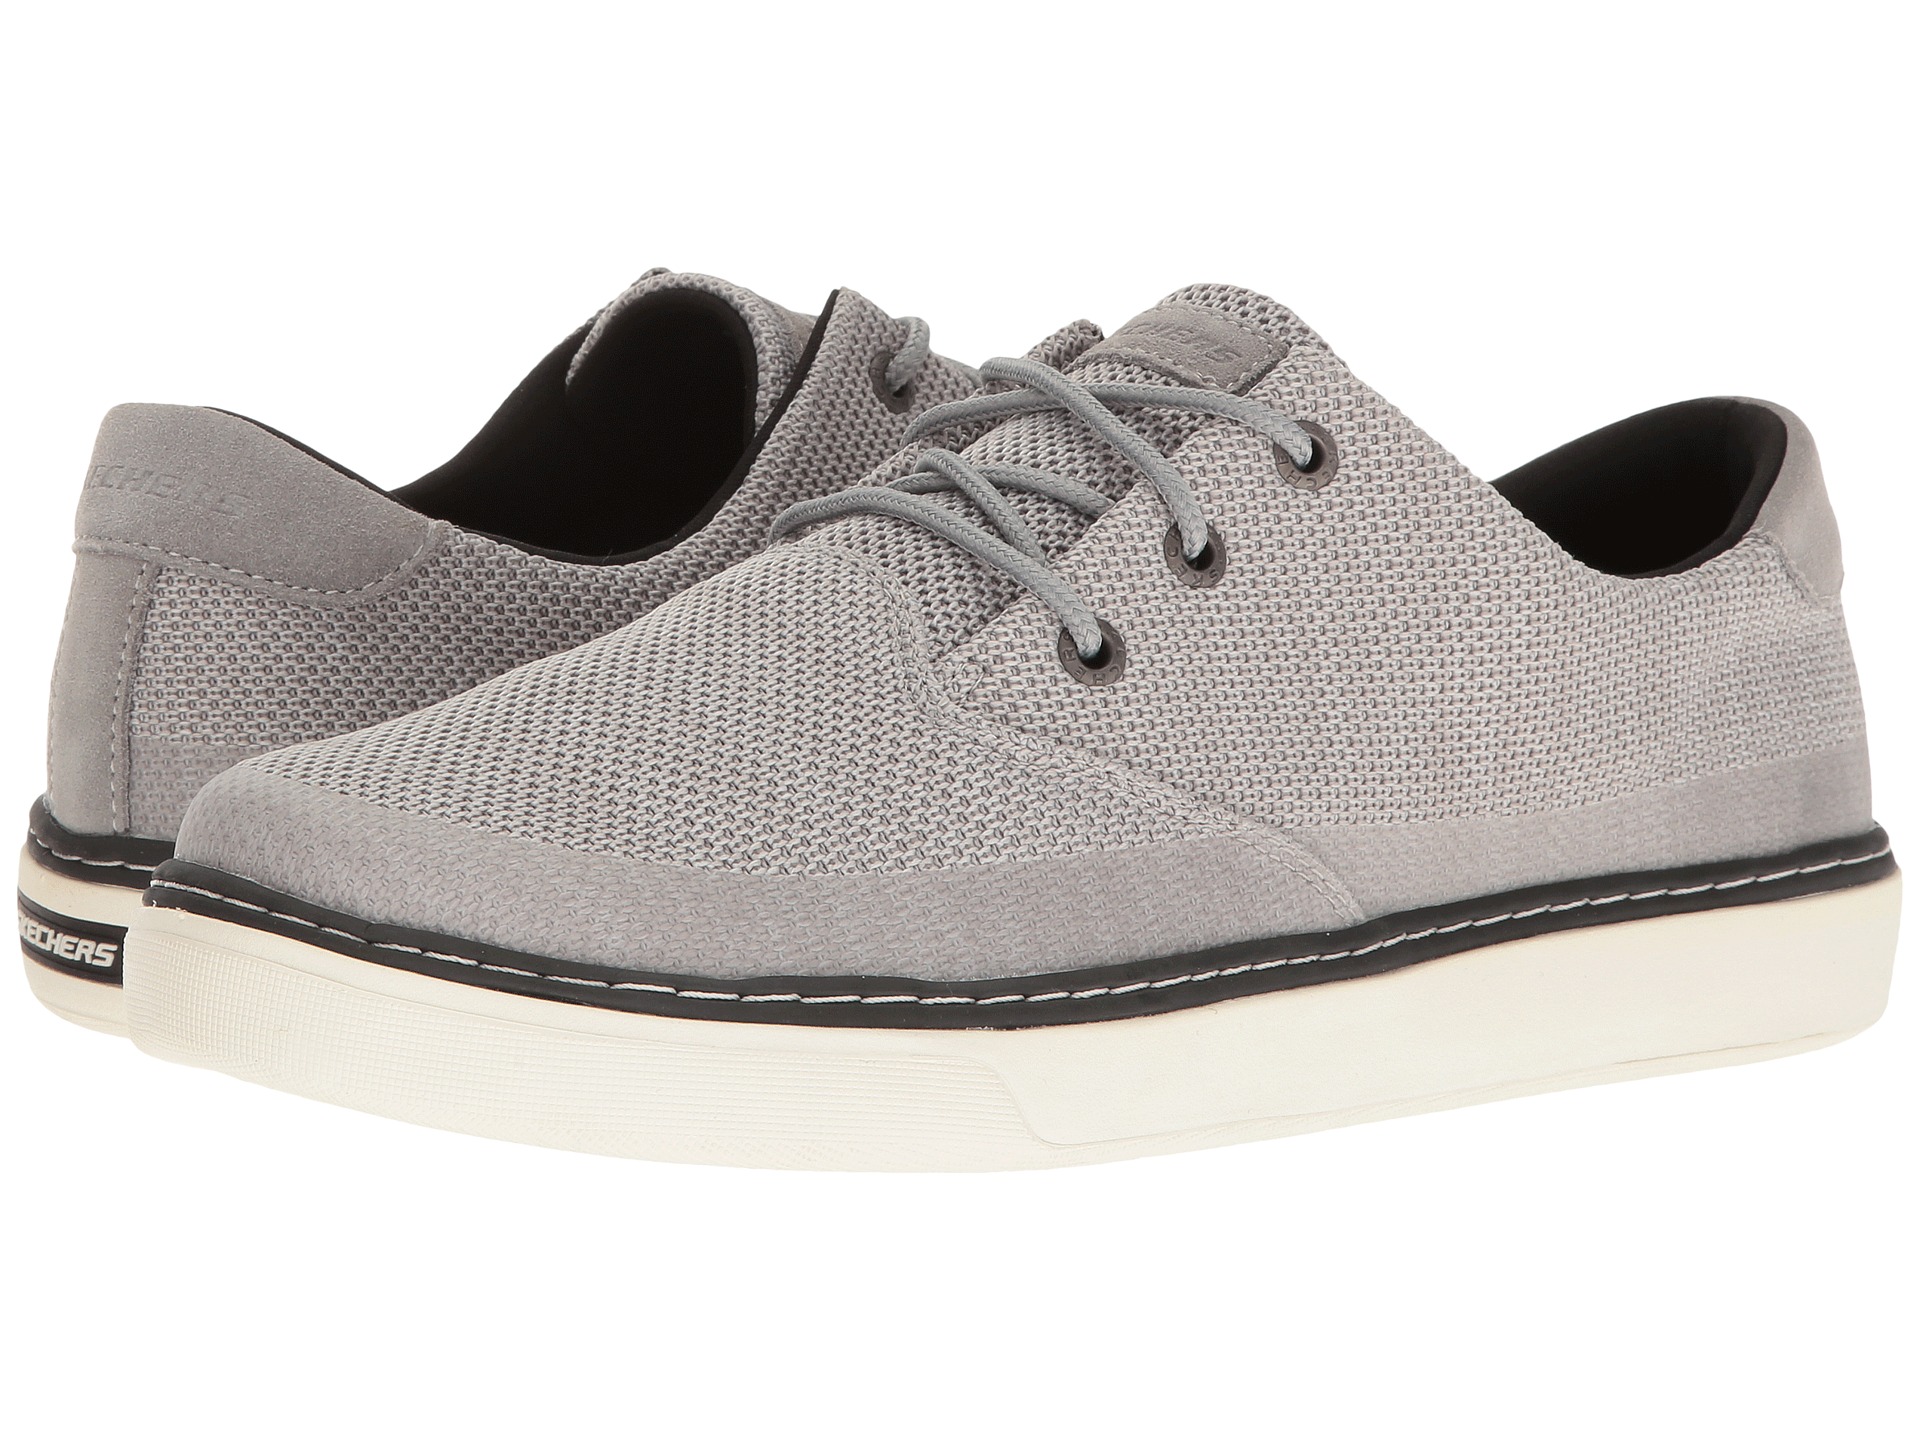 SKECHERS Relaxed Fit Palen - Repend - Zappos.com Free Shipping BOTH Ways